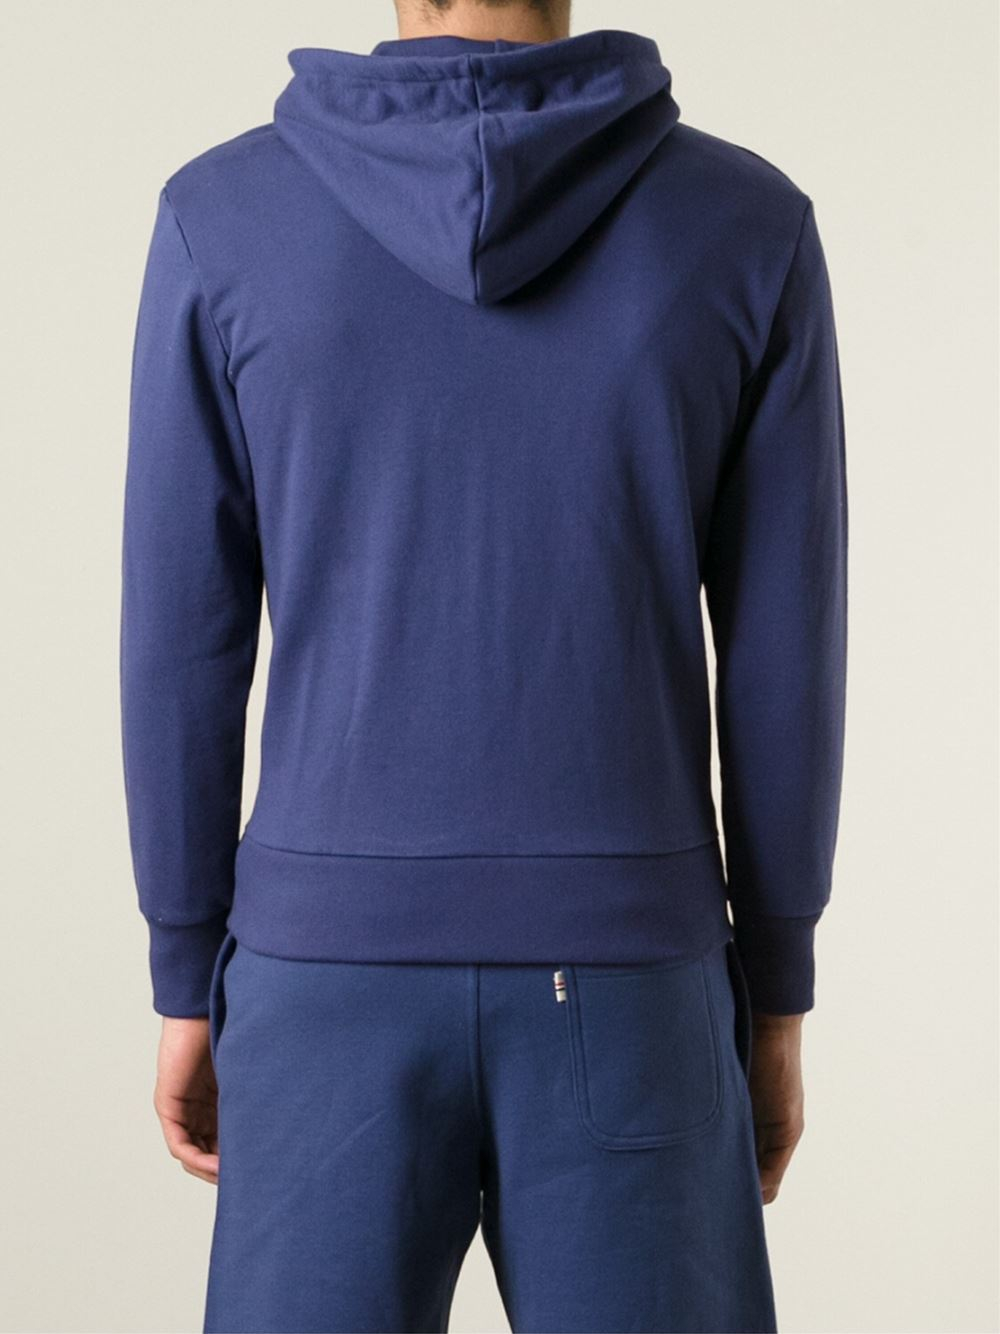 Maison kitsuné Embroidered Fox Hoodie in Blue for Men | Lyst